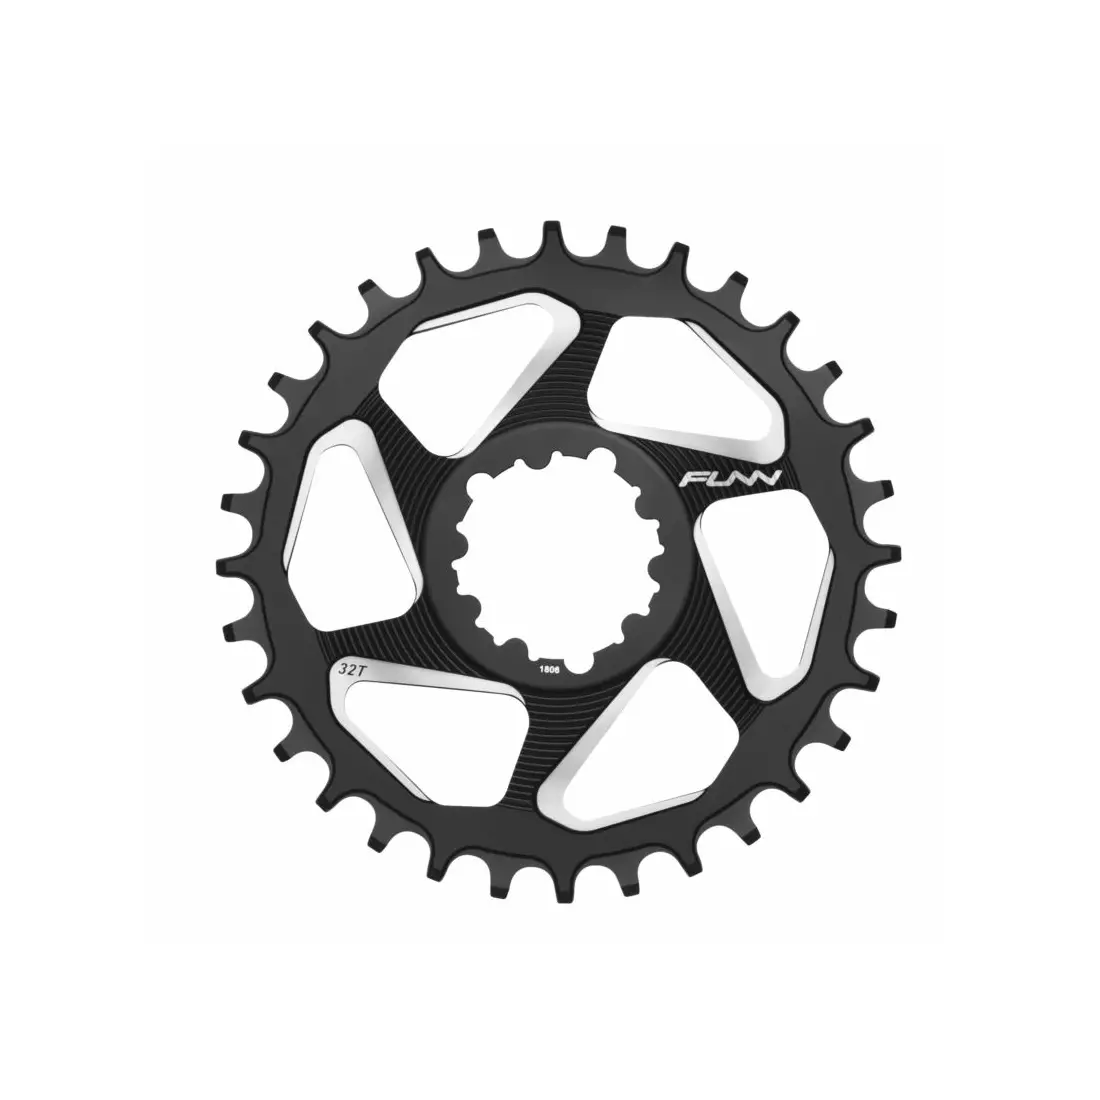 FUNN SOLO DX 32T NARROW- WIDE bicycle sprocket to crank black